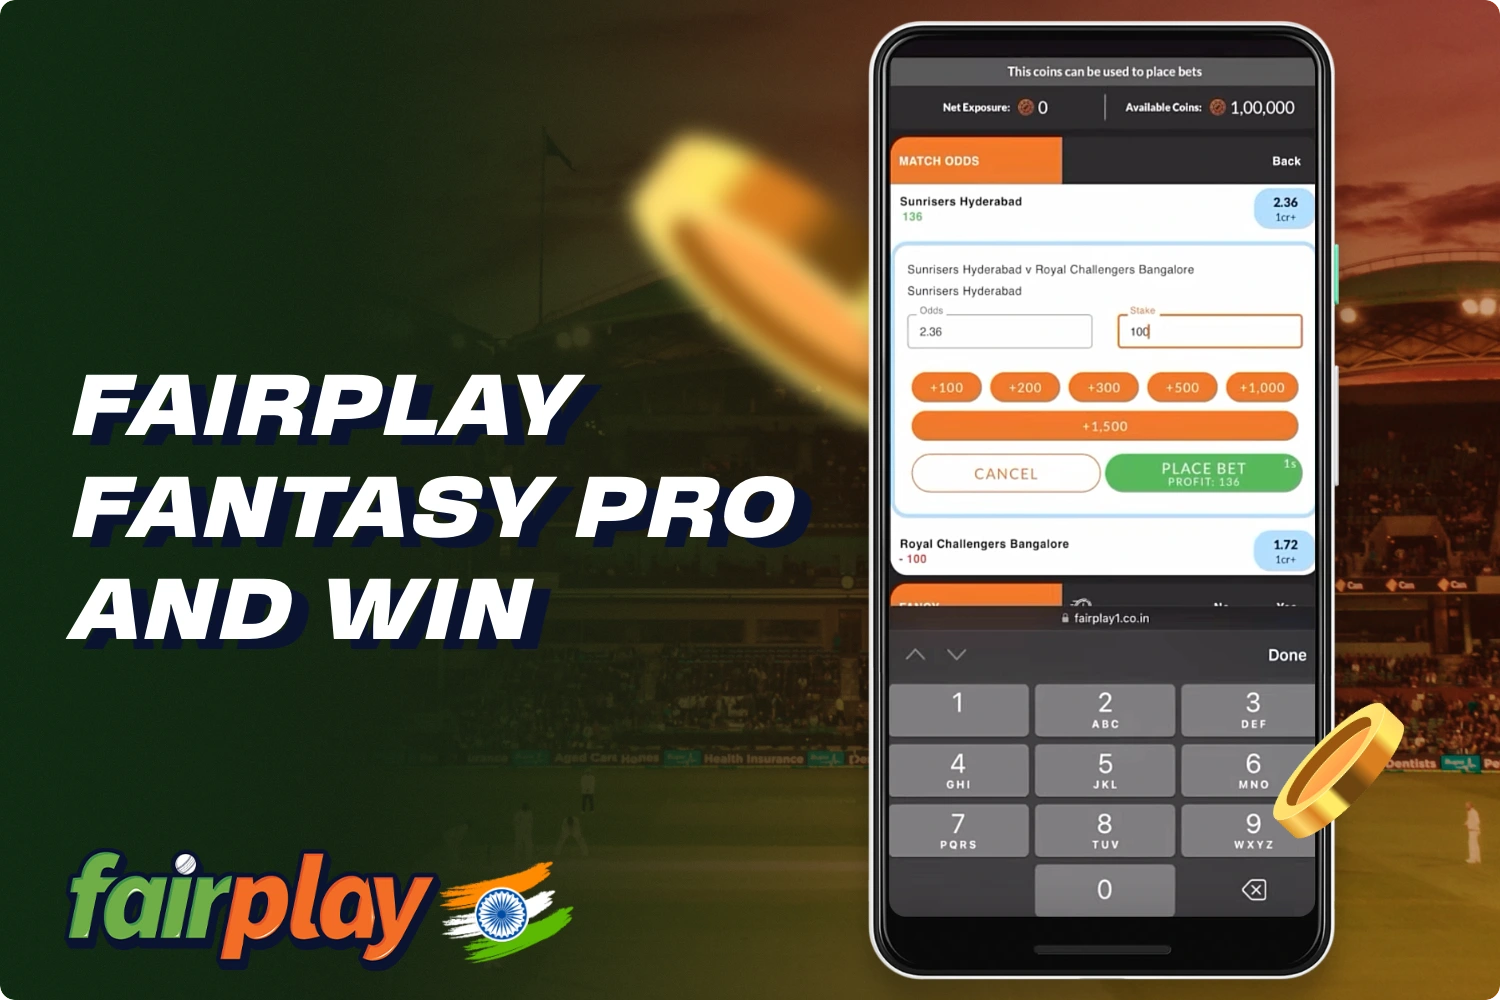 Fantasy Pro is an enhanced version of fantasy sports betting